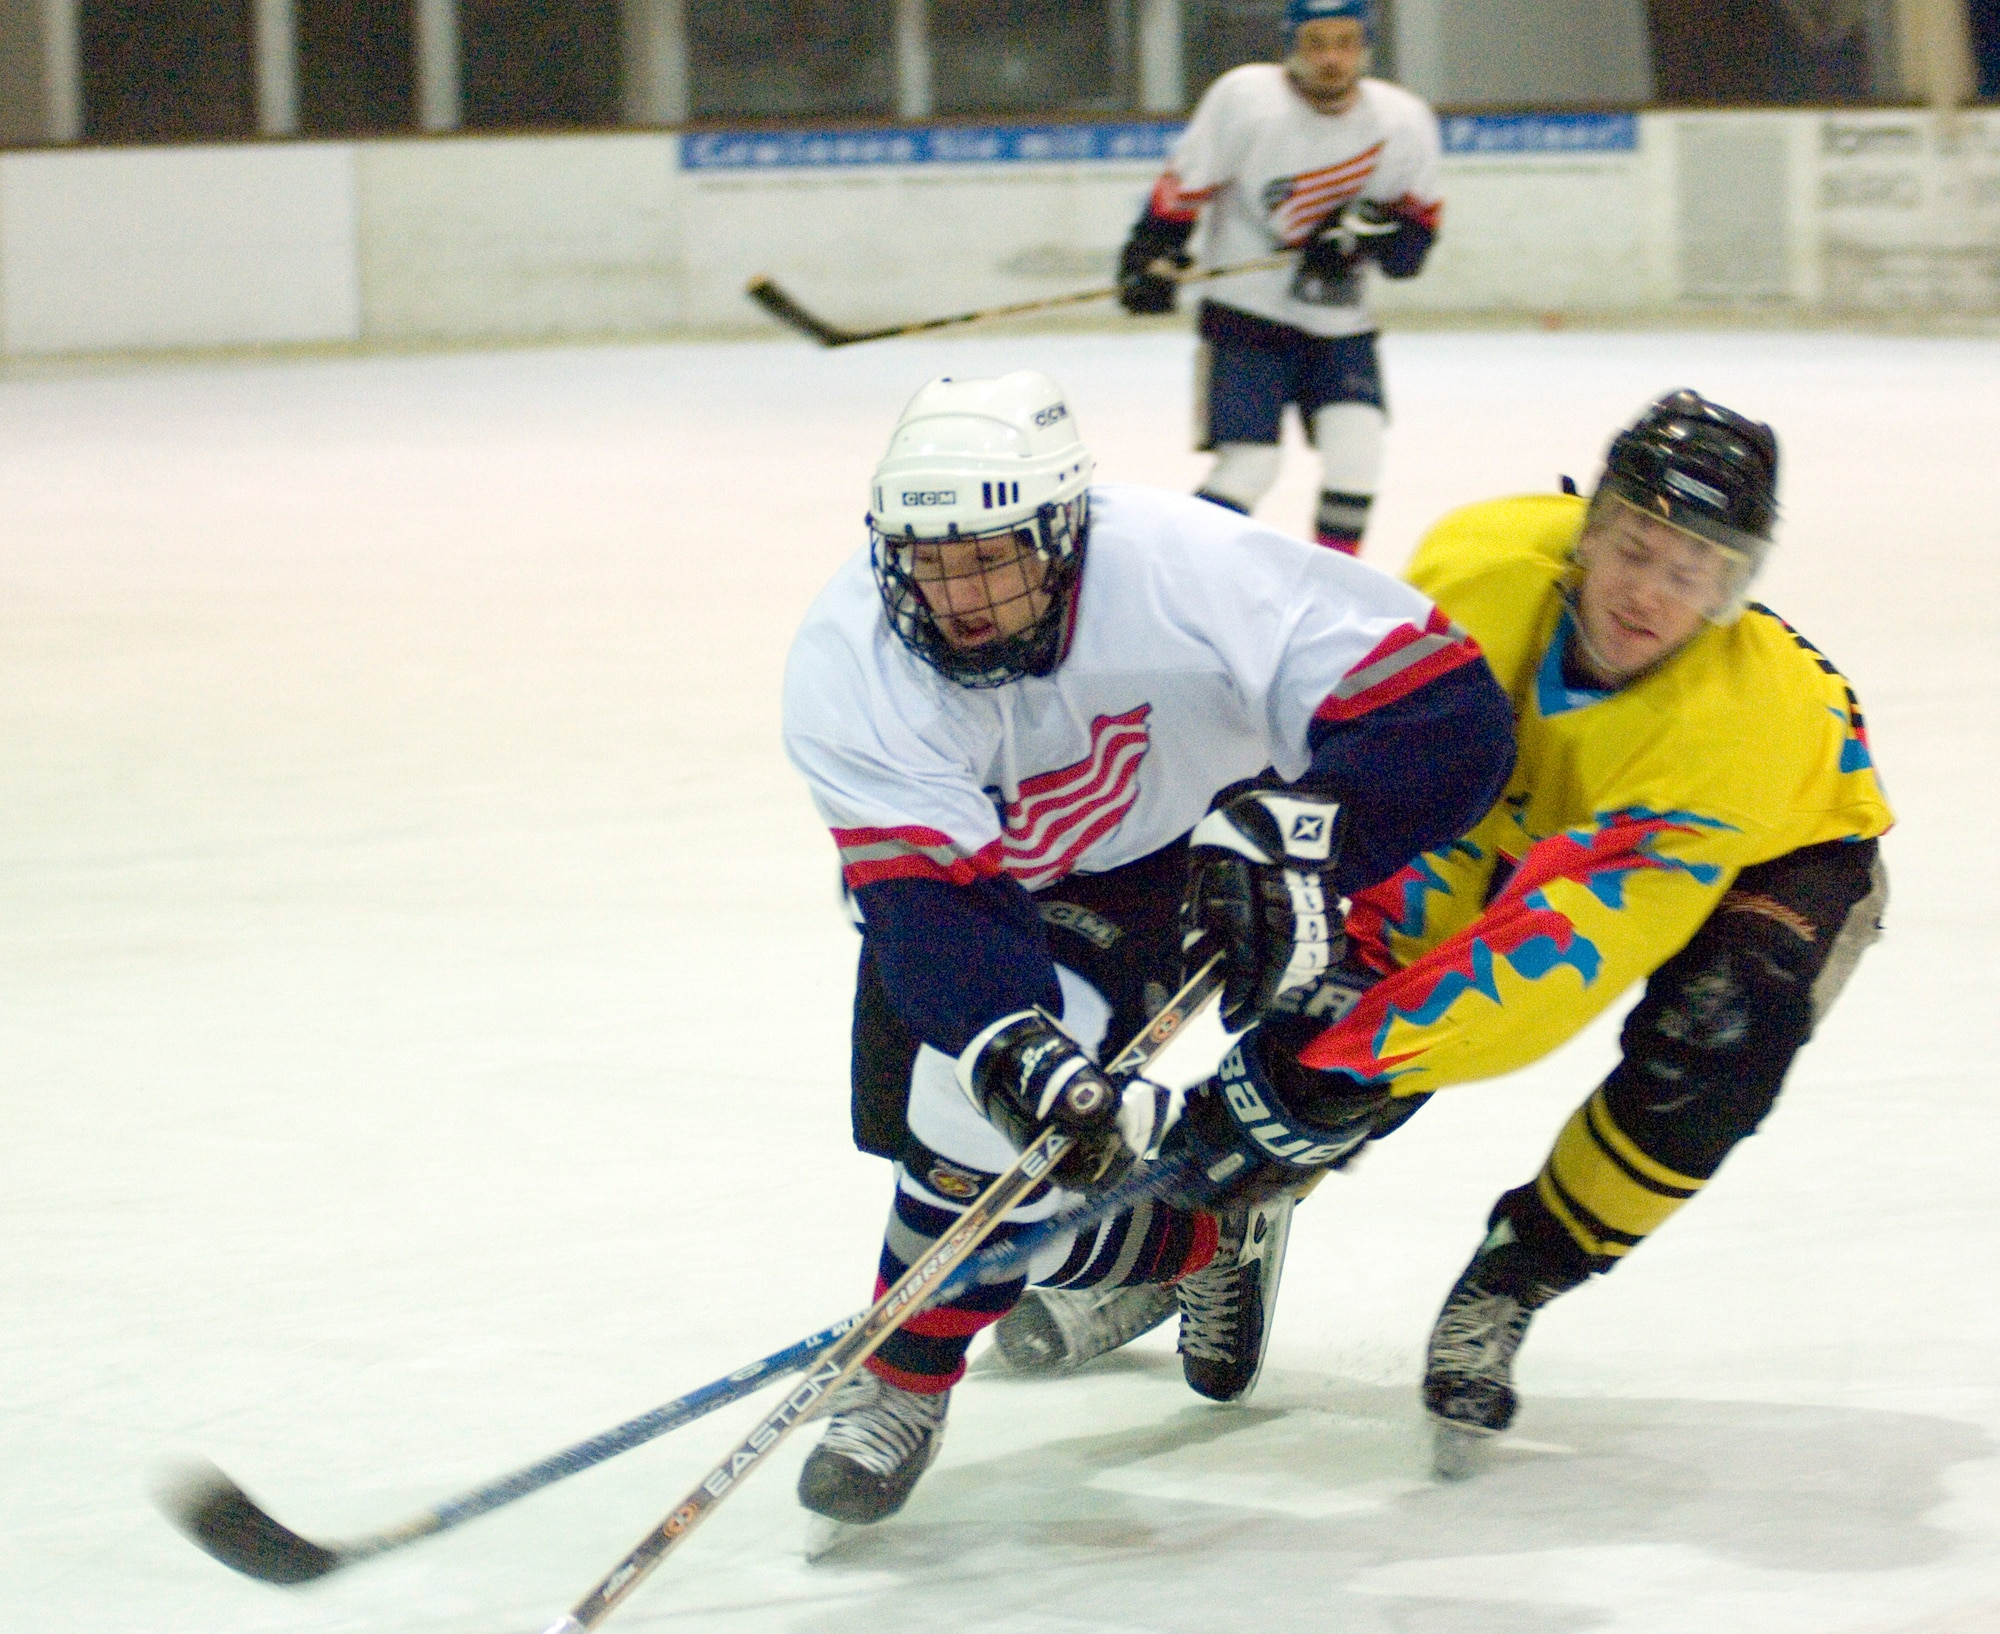 EPPELHEIM, Germany (AFPN) -- Capt. Kris Uber (left) races to the puck against a player from the Eppelheim Hawks. The KMC Eagles won 6-4. The Kaiserslautern Military Community hockey team is made up of 30 players in different skill levels varying from semi-pro and college to players experiencing their first organized game. Captain Uber is with the 76th Airlift Squadron at Ramstein Air Base, Germany. (U.S. Air Force photo by Master Sgt. John E. Lasky)